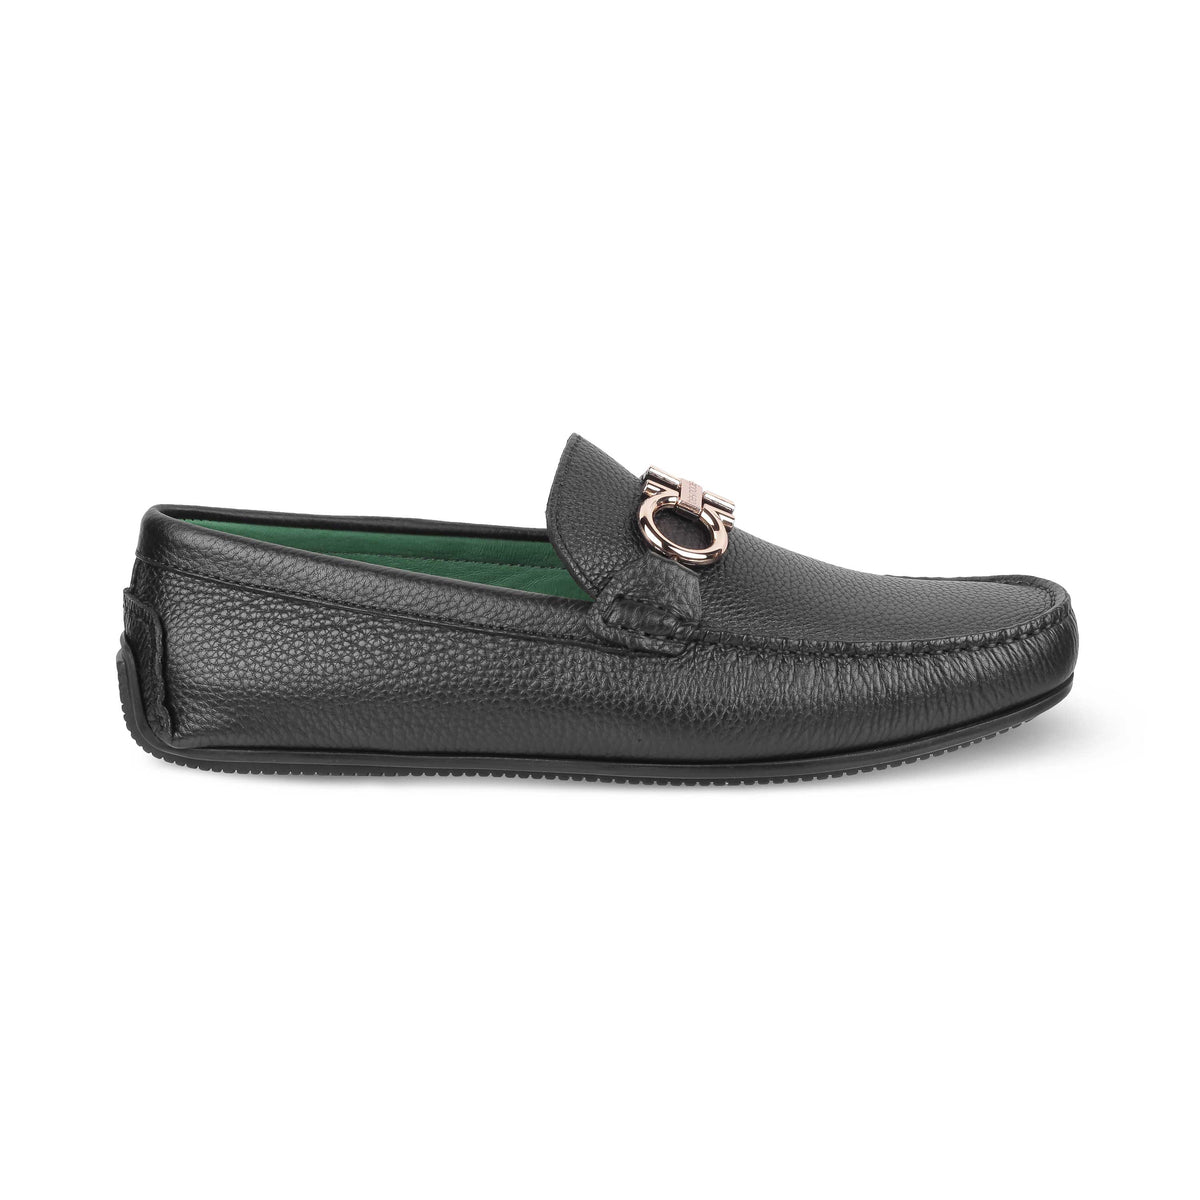 Tresmode Stpierre Black Men's Leather Driving Loafers - Tresmode